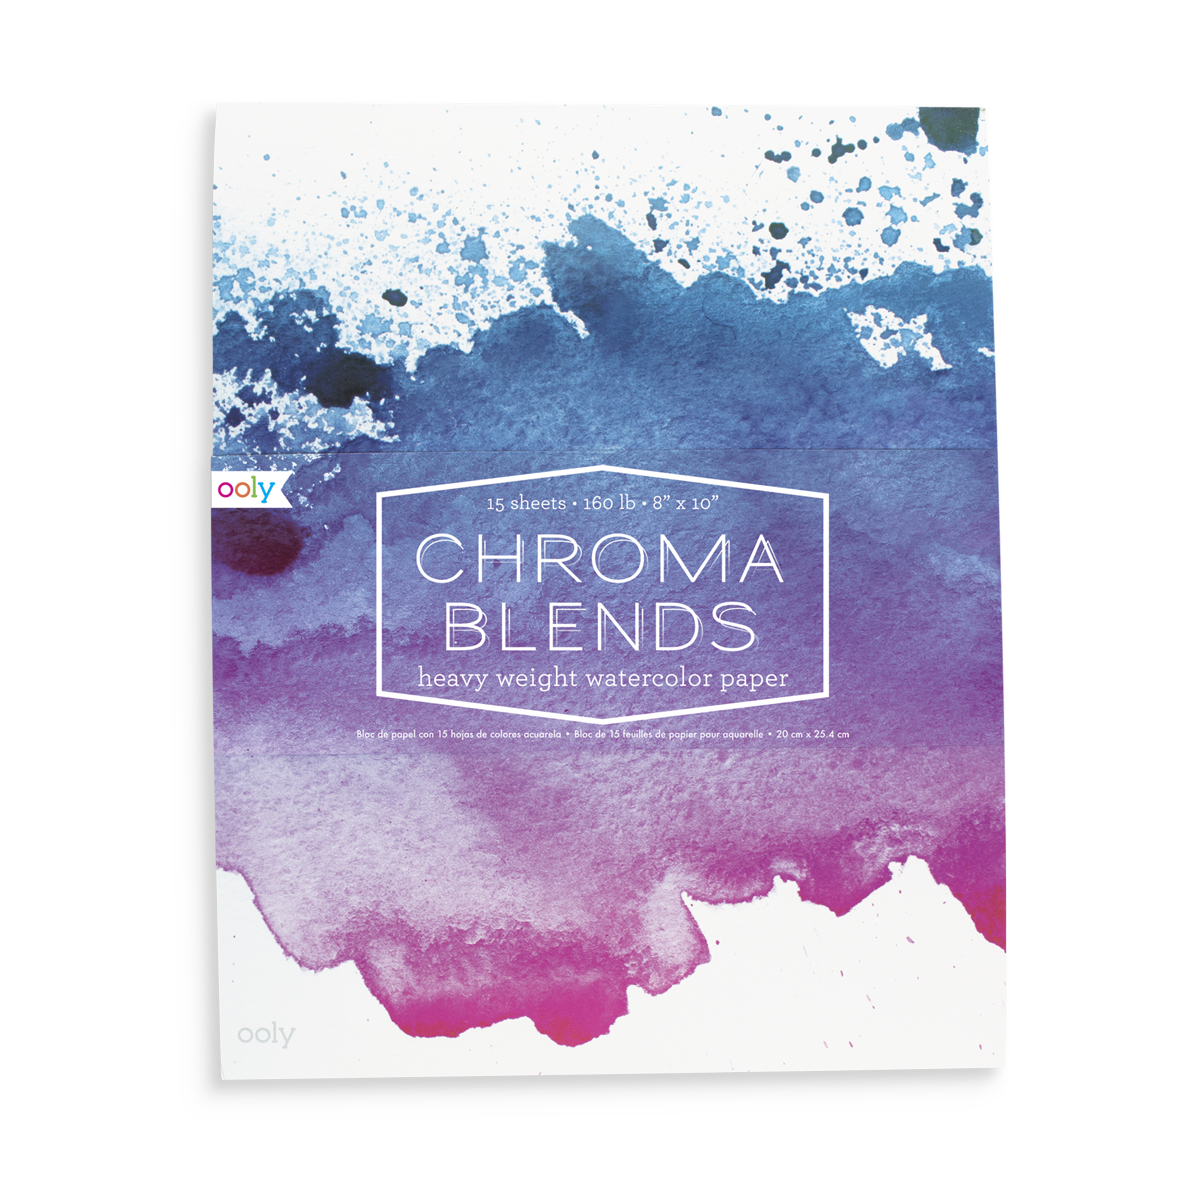 OOLY Chroma Blends Watercolor Paper Watercolor Sets